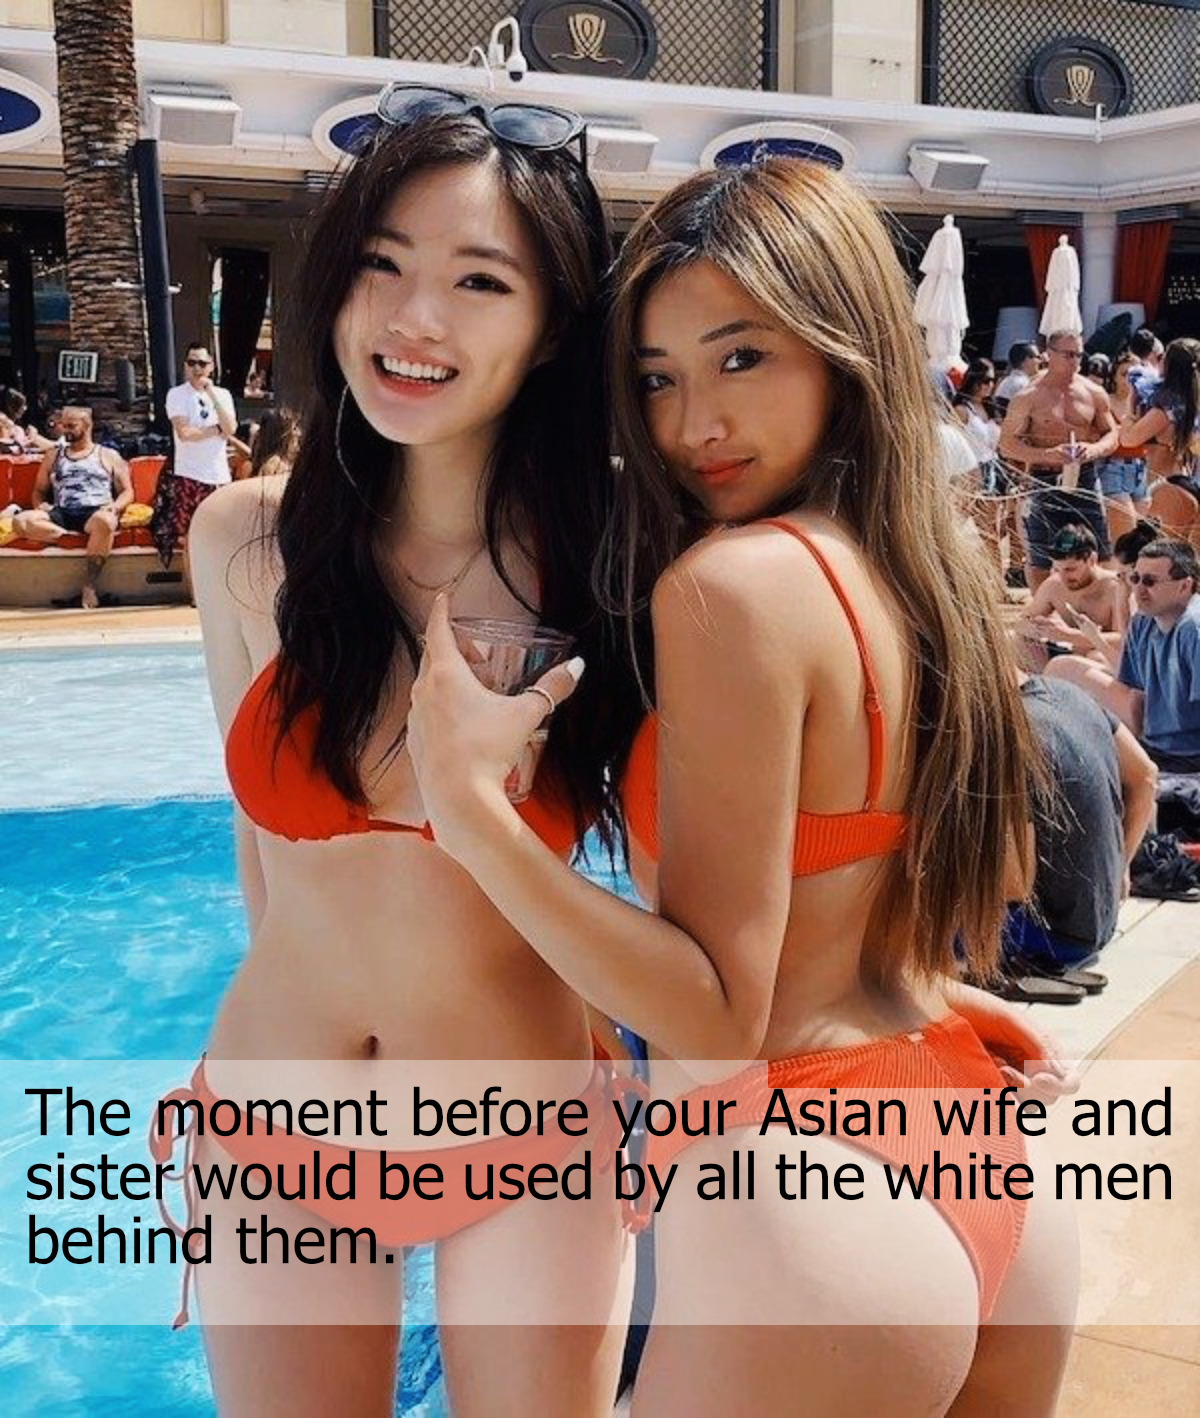 Your Asian wife and sister at the pool party Scrolller picture